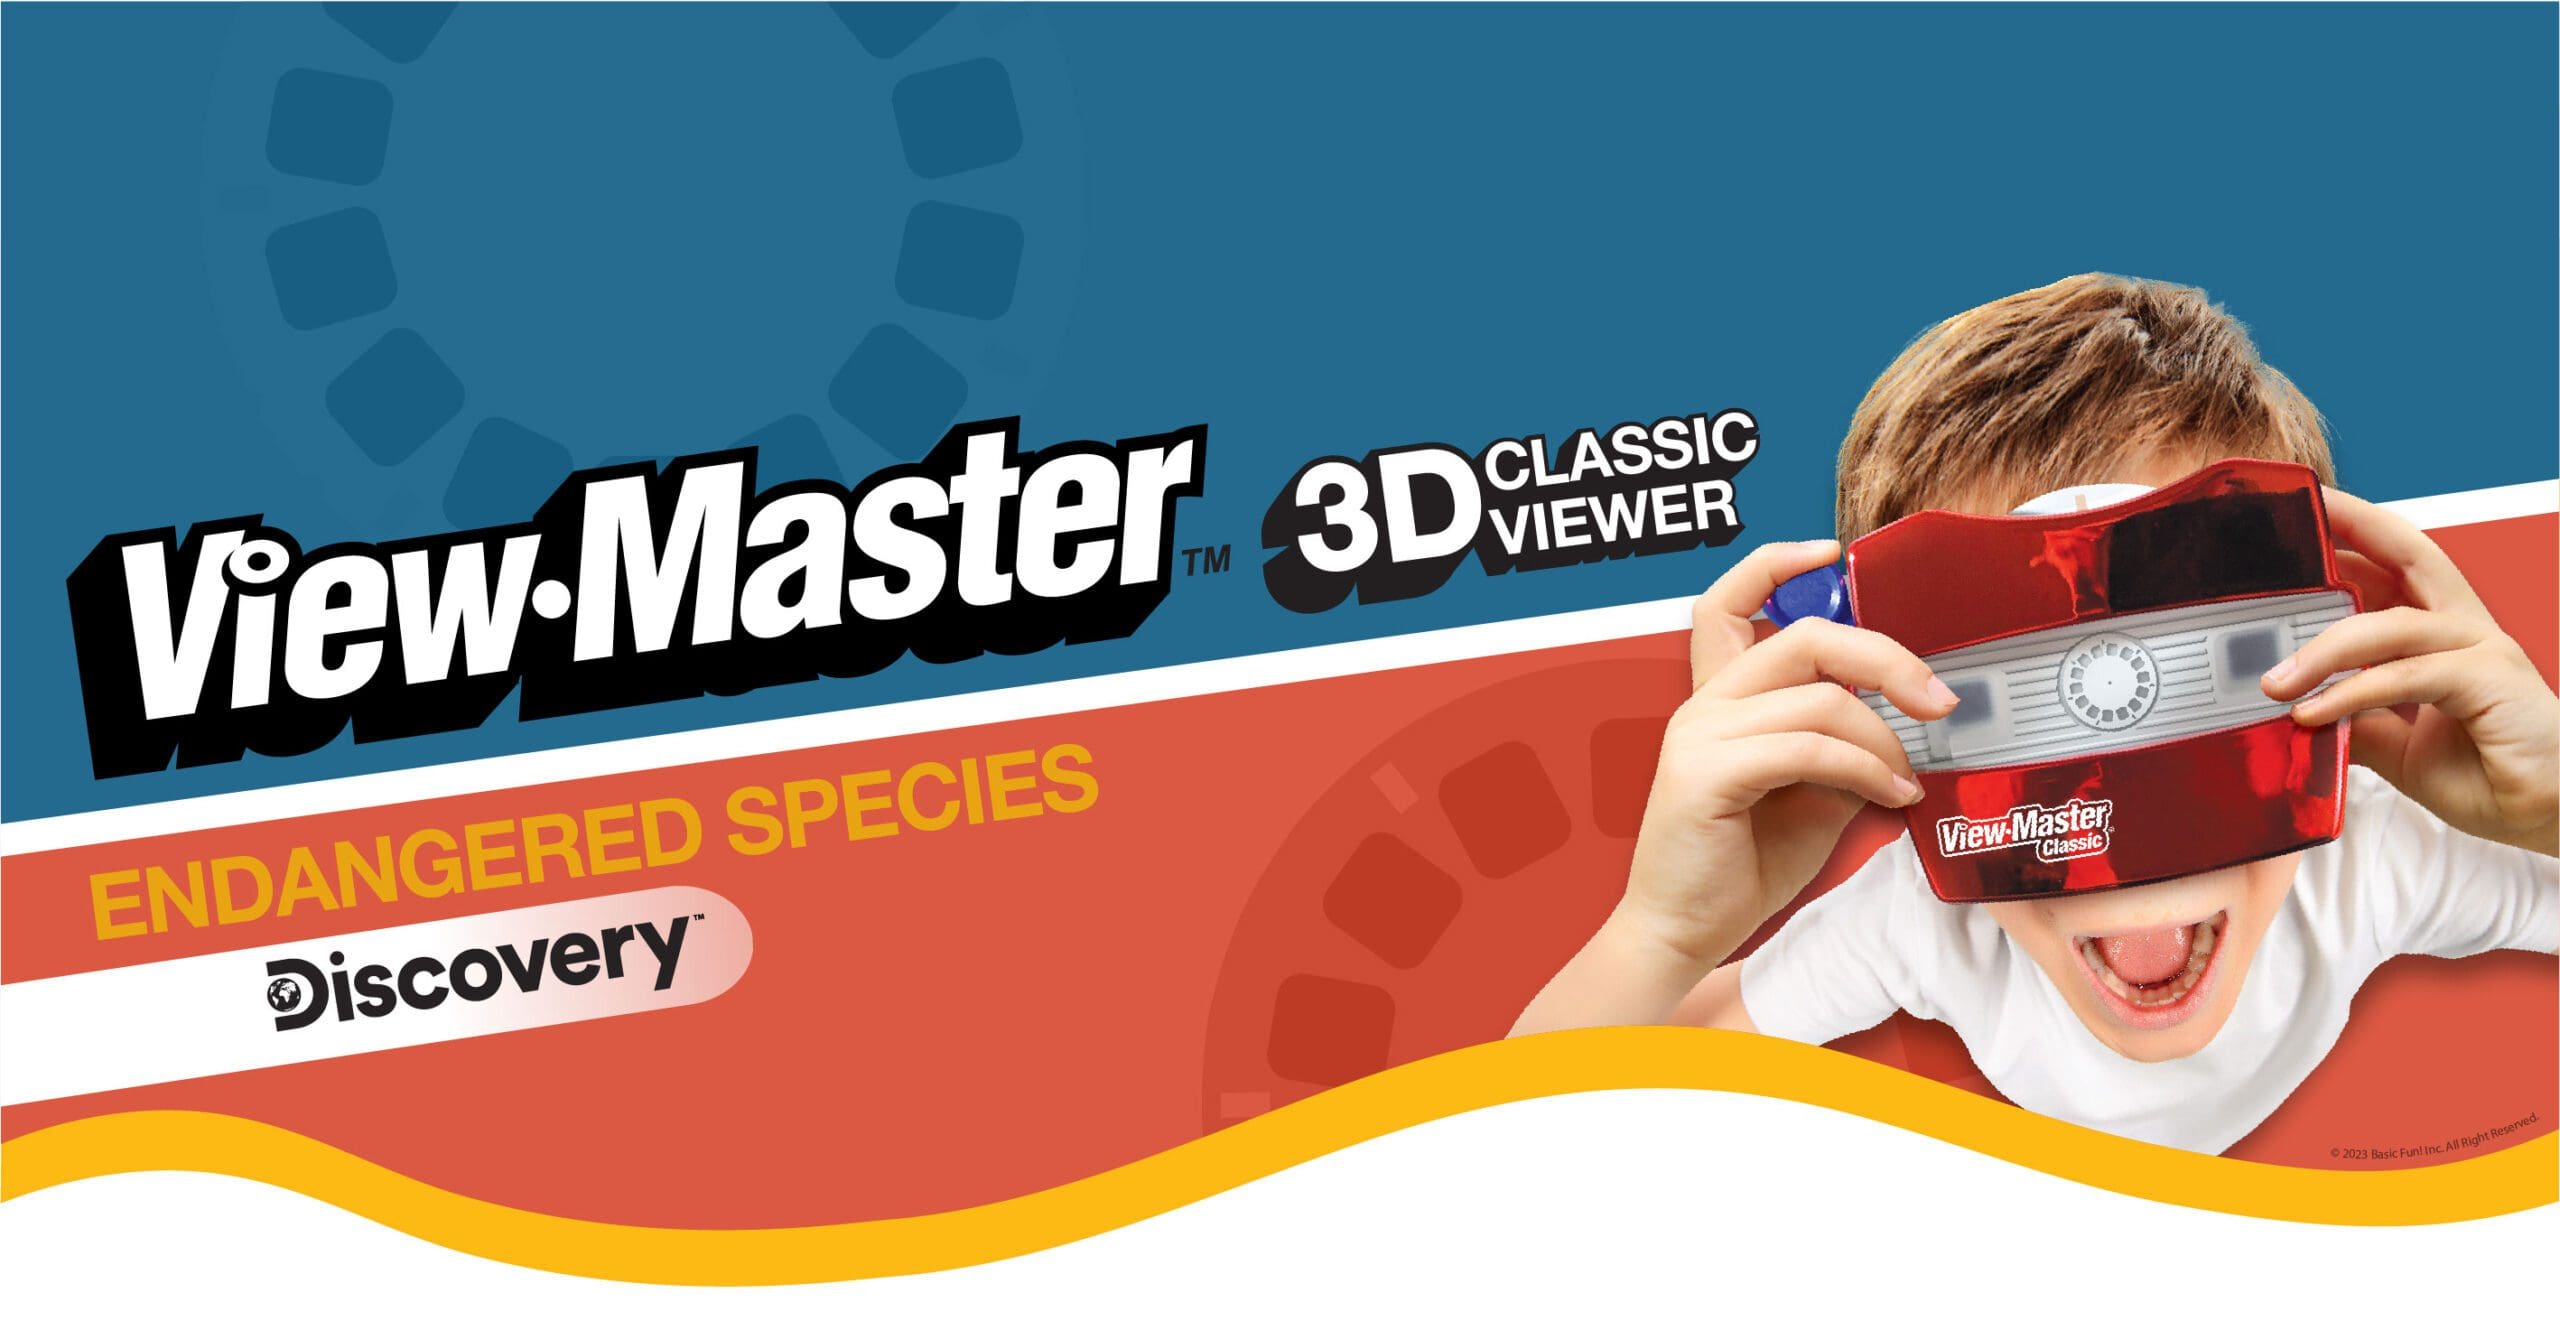 View Master banner showing a bot holding a view master up to his face